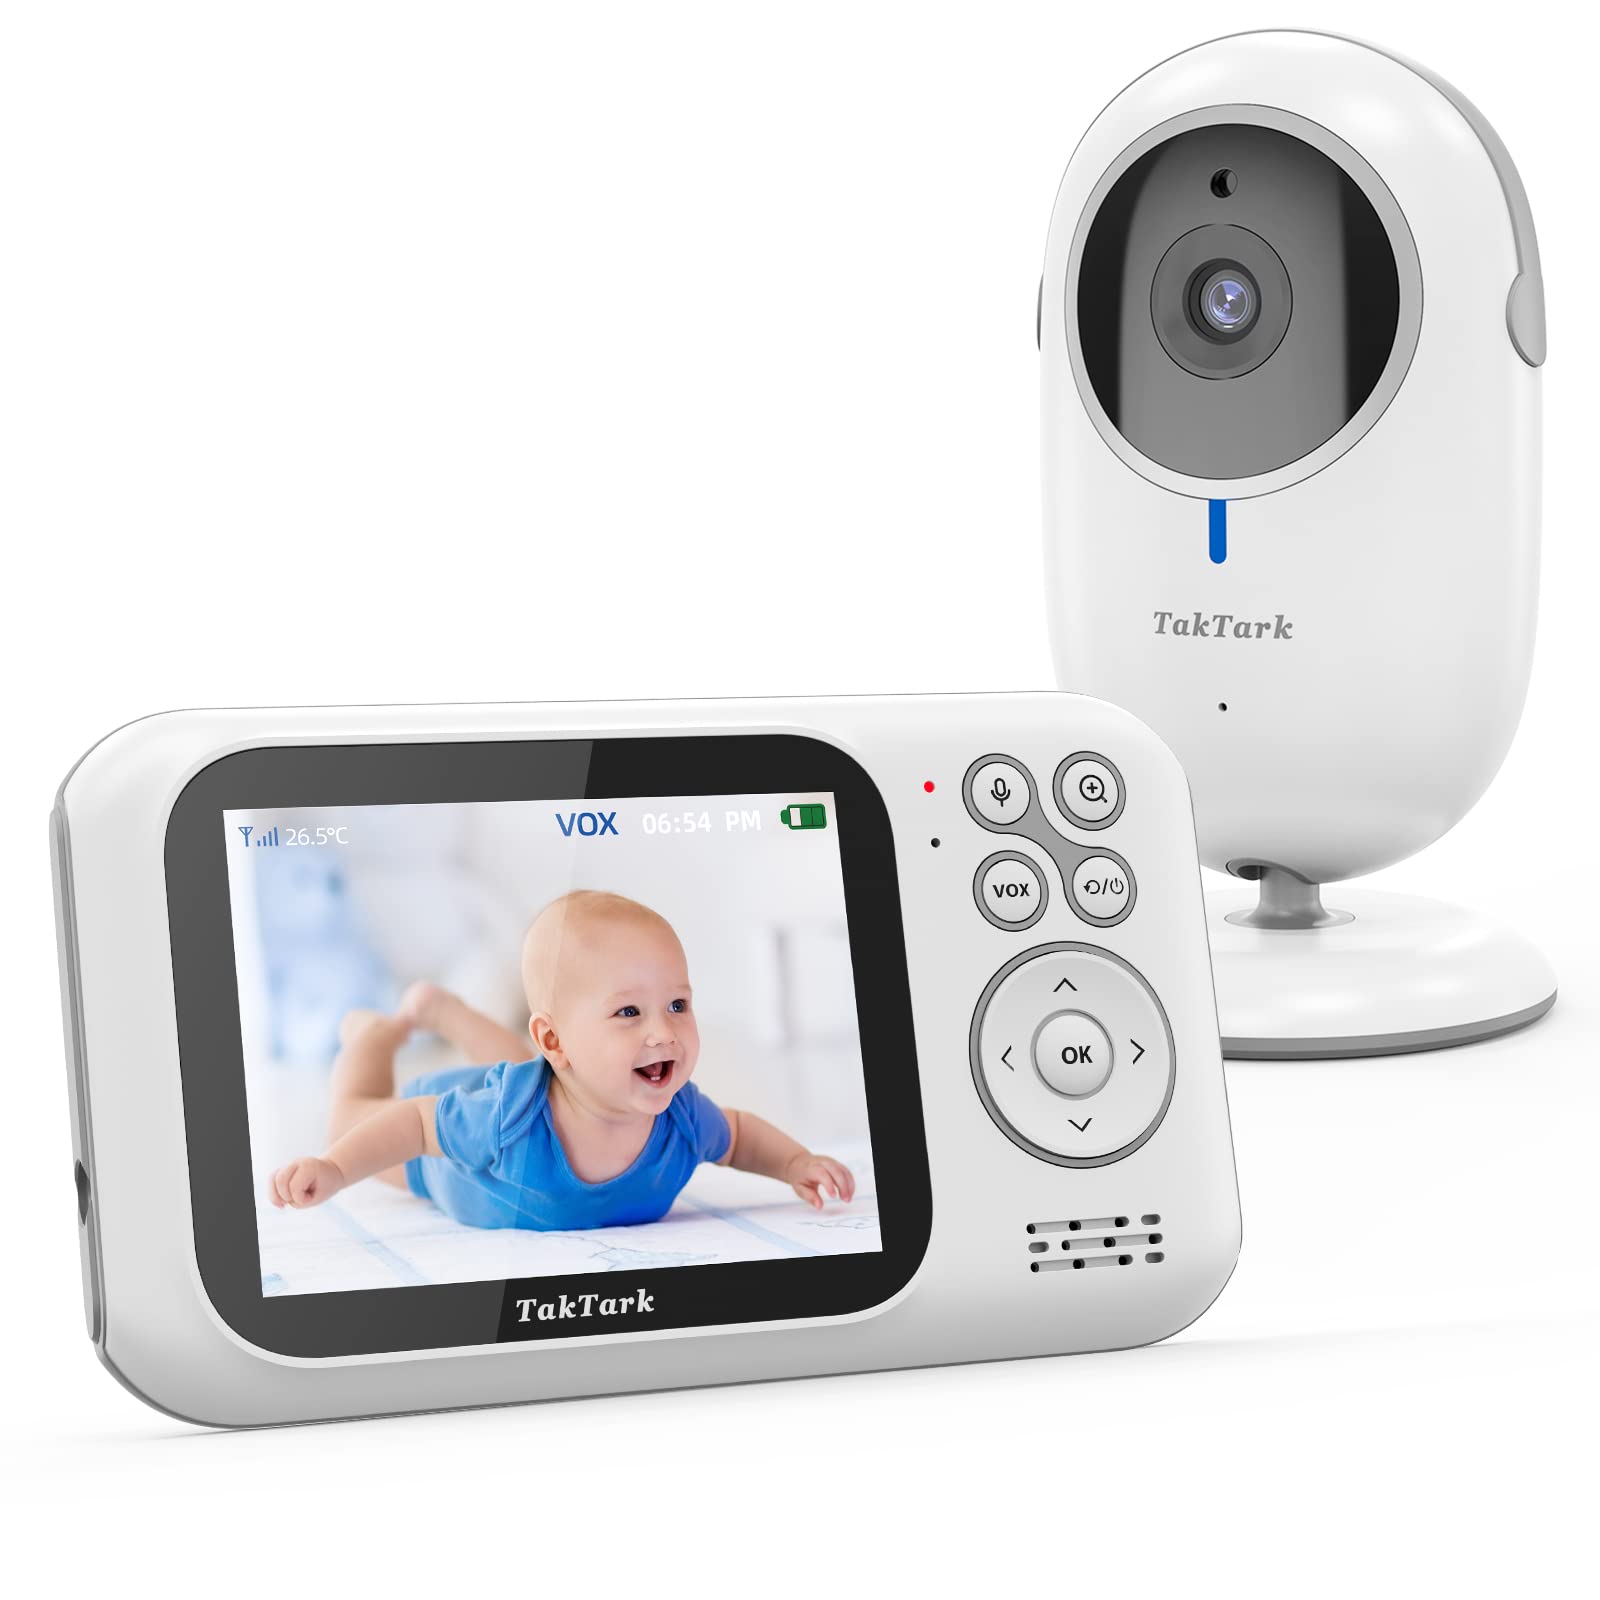 TakTark Baby Monitor with camera and Audio, TakTark Video Baby camera Monitor No WiFi, 2 Way Audio, Infrared Night Vision, Digit